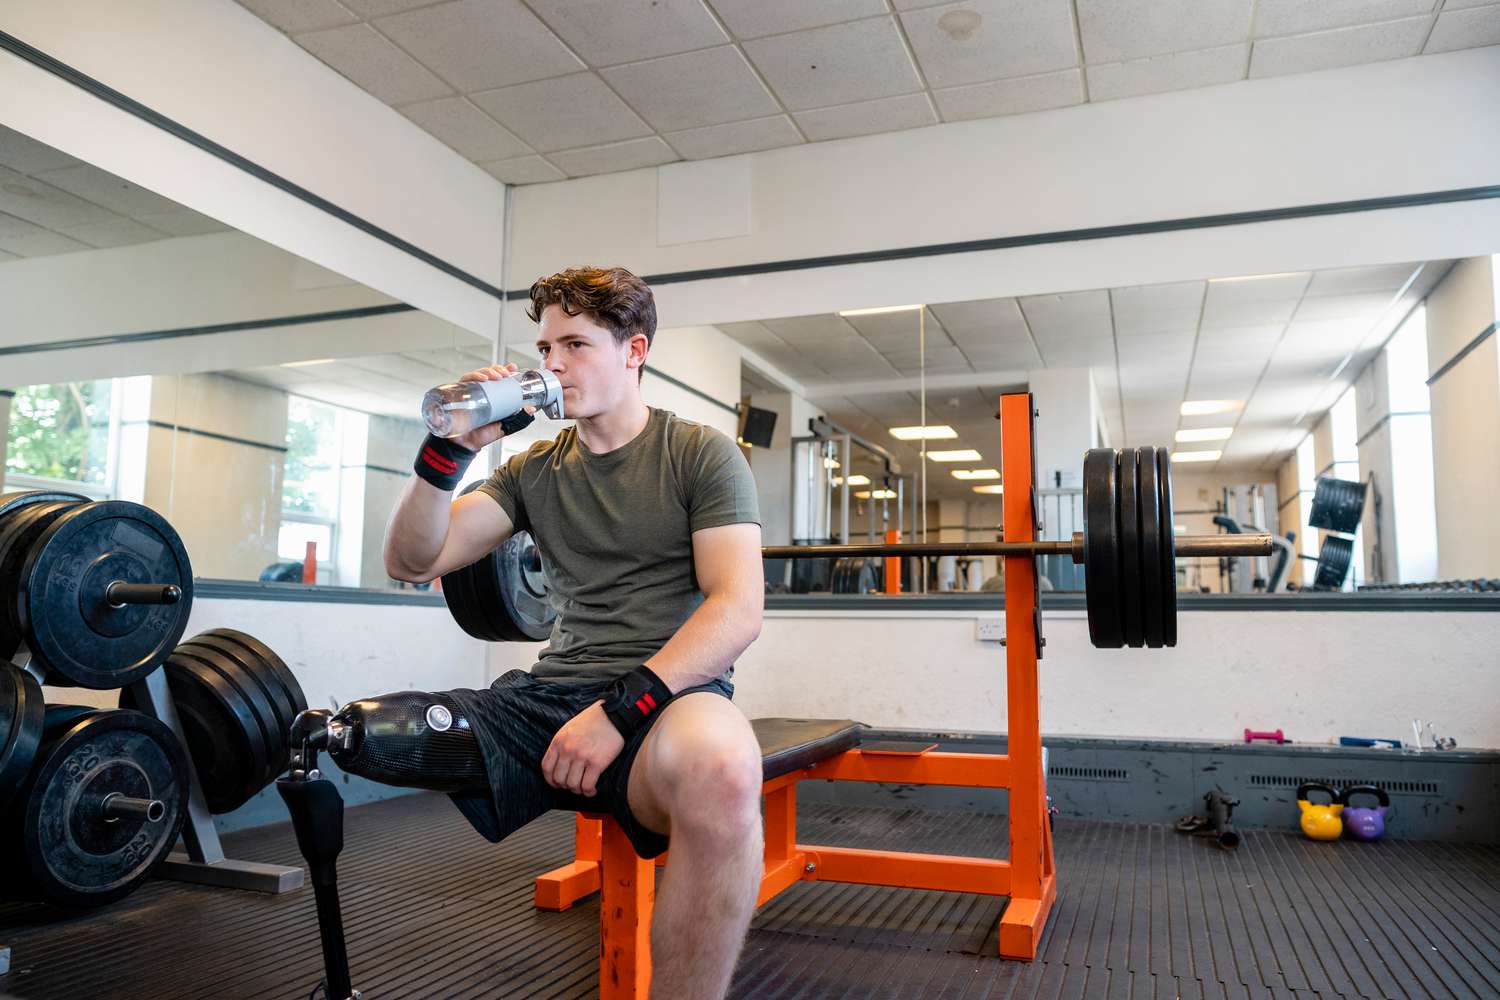 A front view shot of a young teenage male athlete with a prosthetic leg sitting on a gym bench. He is looking forward and drinking water after doing a set of bench presses with a barbell.